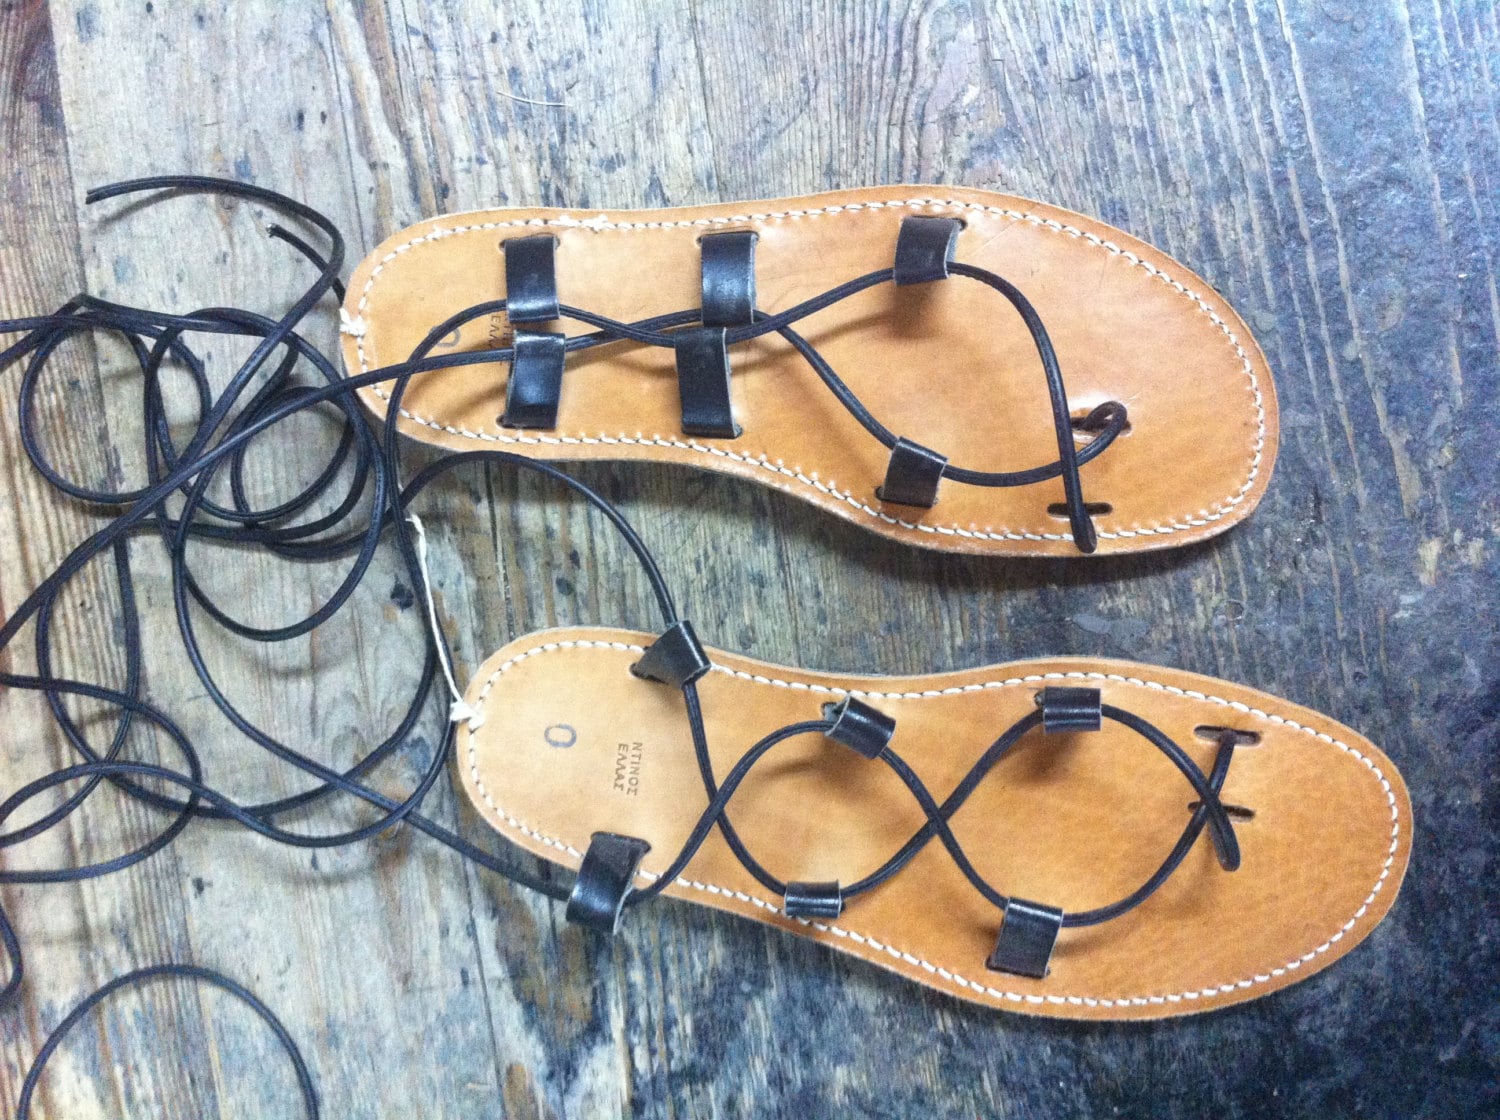 Authentic Handmade, Greek Leather Sandals - Etsy